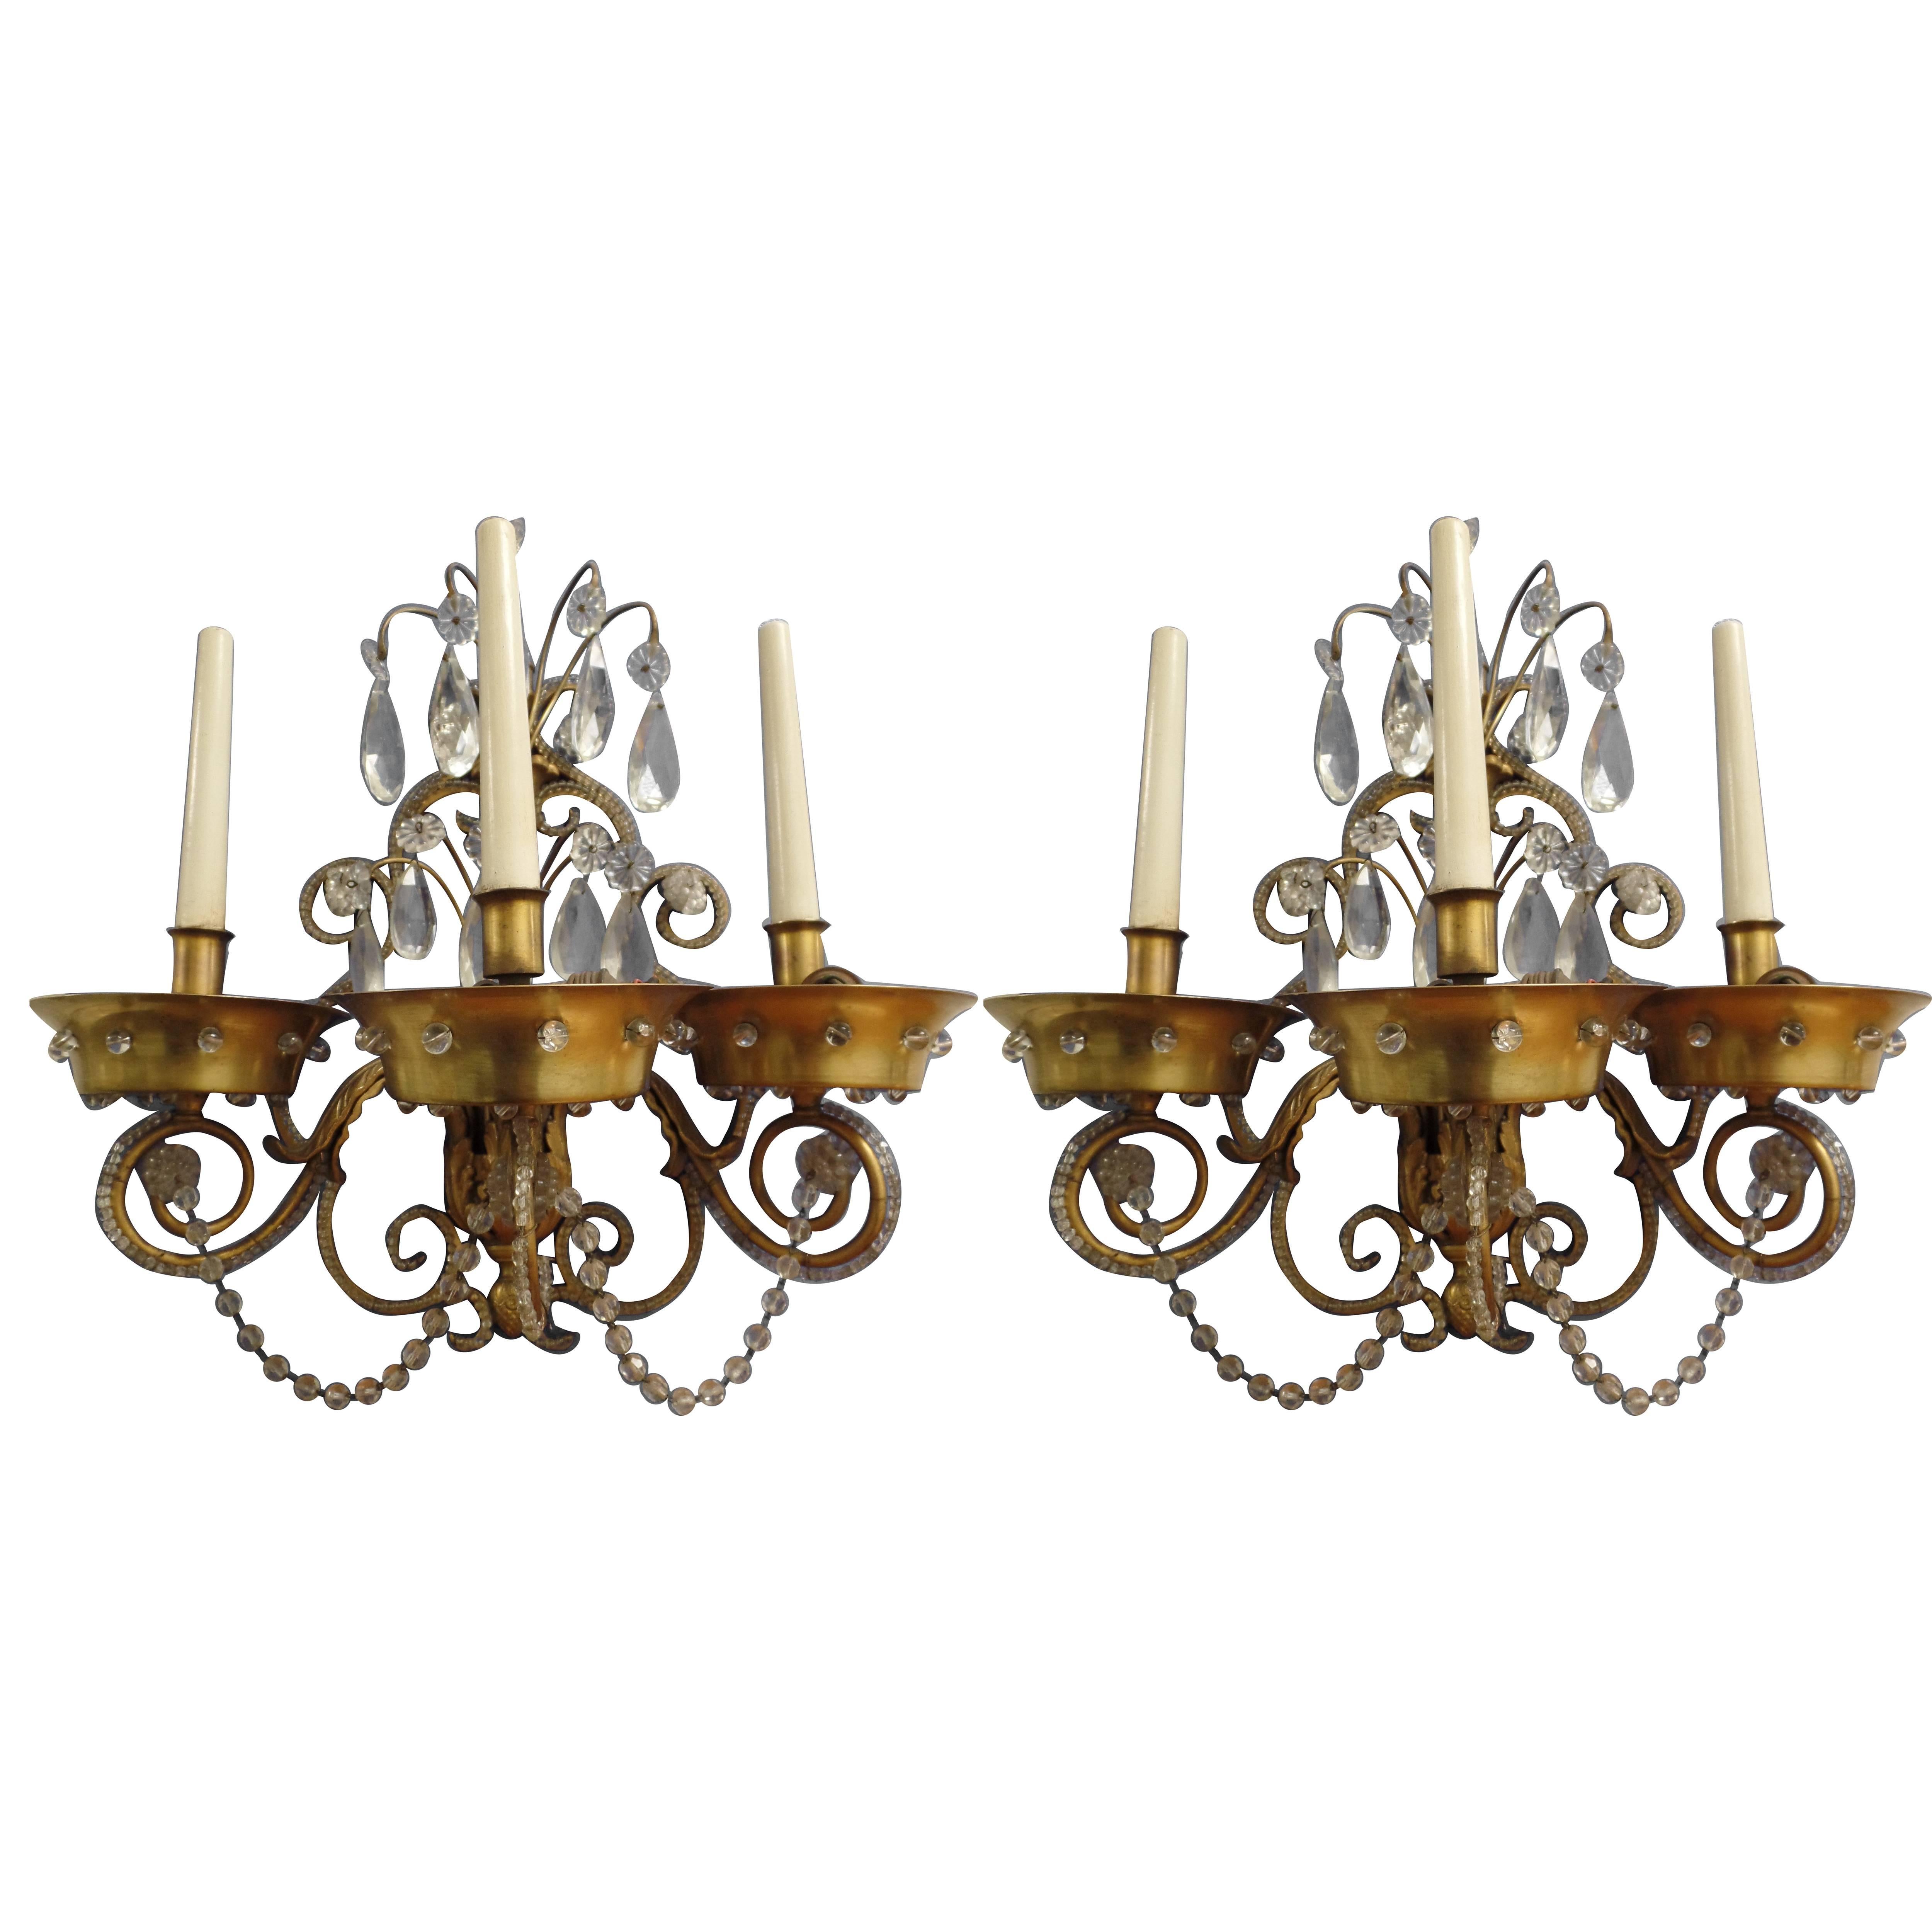 Pair of French Modern Neoclassical Brass and Crystal Sconces by Maison Jansen For Sale